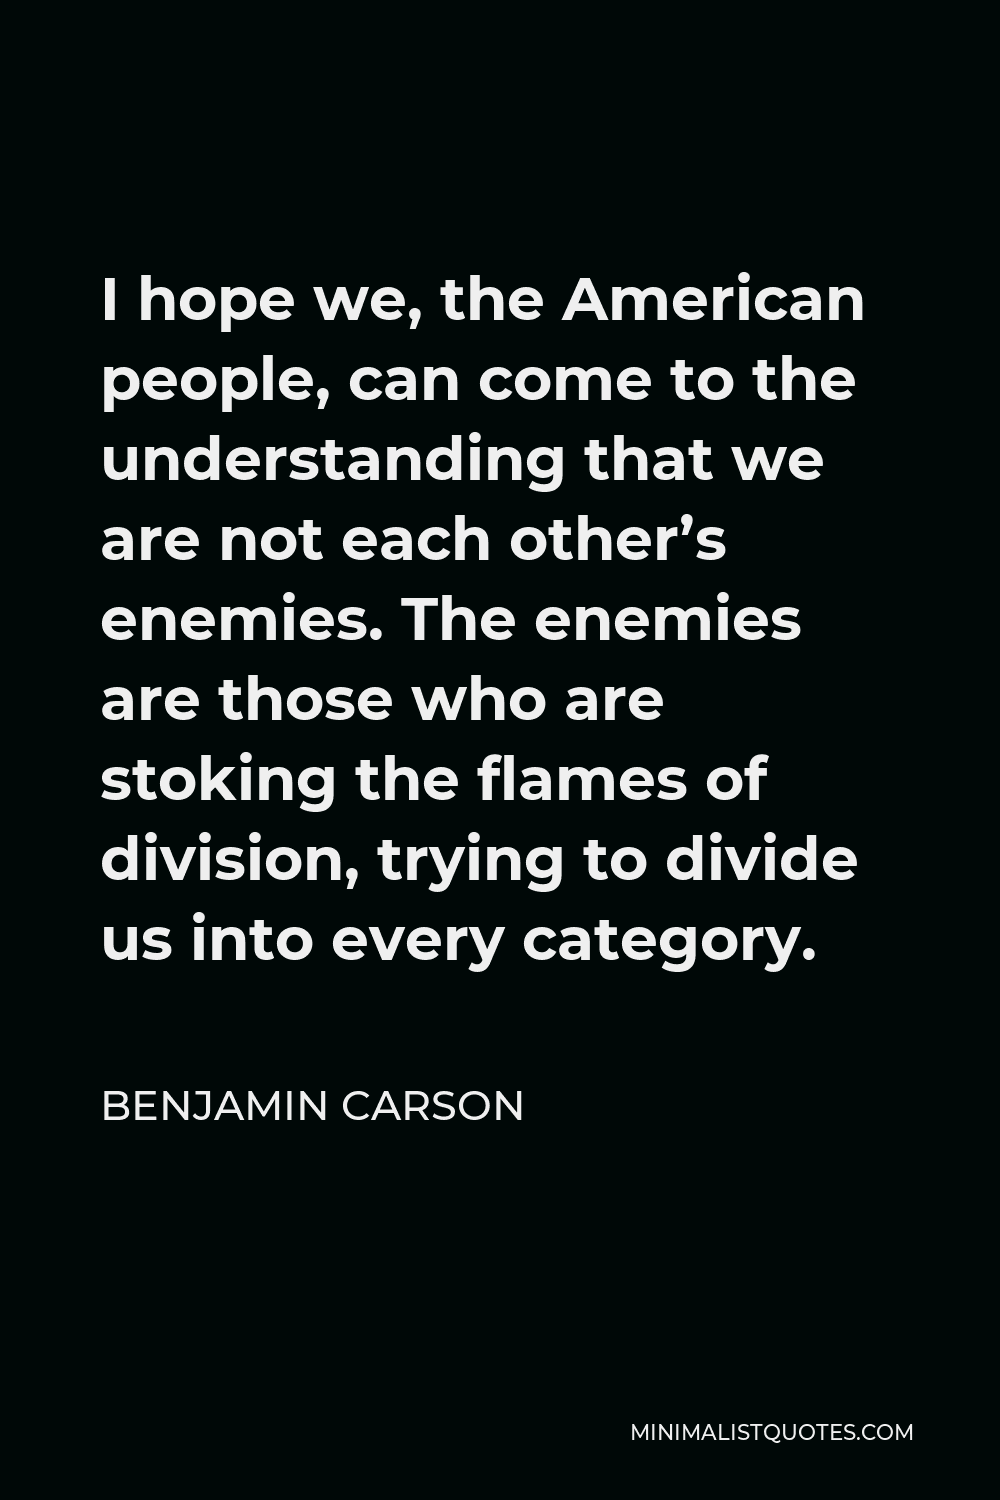 Benjamin Carson Quote - I hope we, the American people, can come to the understanding that we are not each other’s enemies. The enemies are those who are stoking the flames of division, trying to divide us into every category.